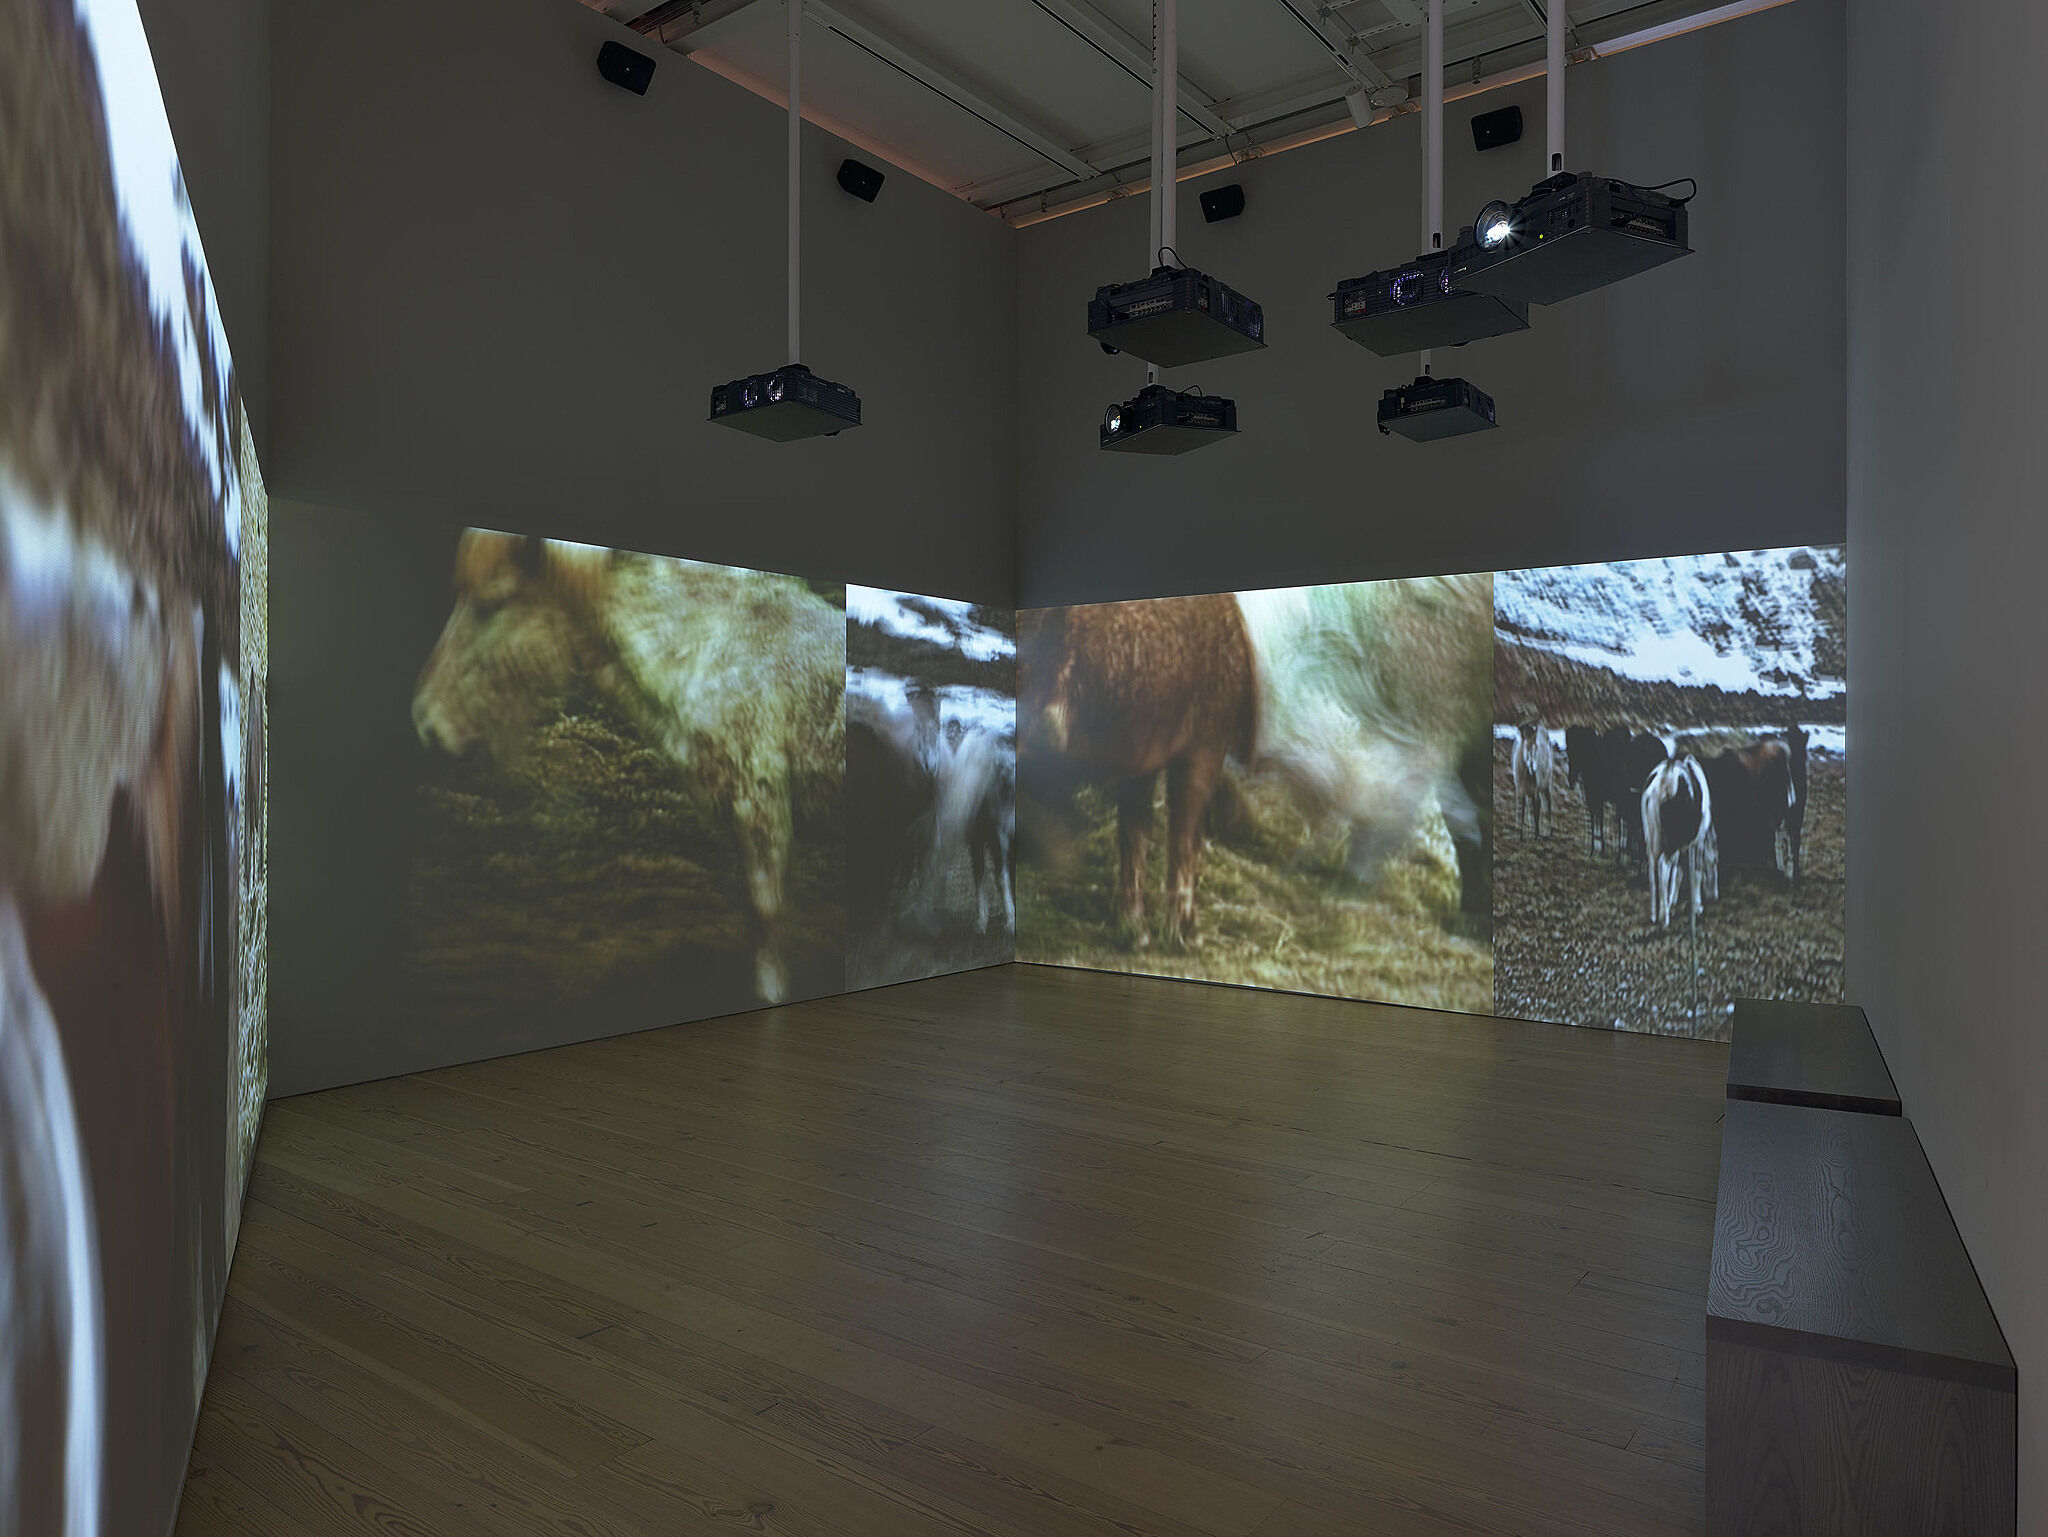 A photo of the Whitney galleries with various movie projections on the walls.